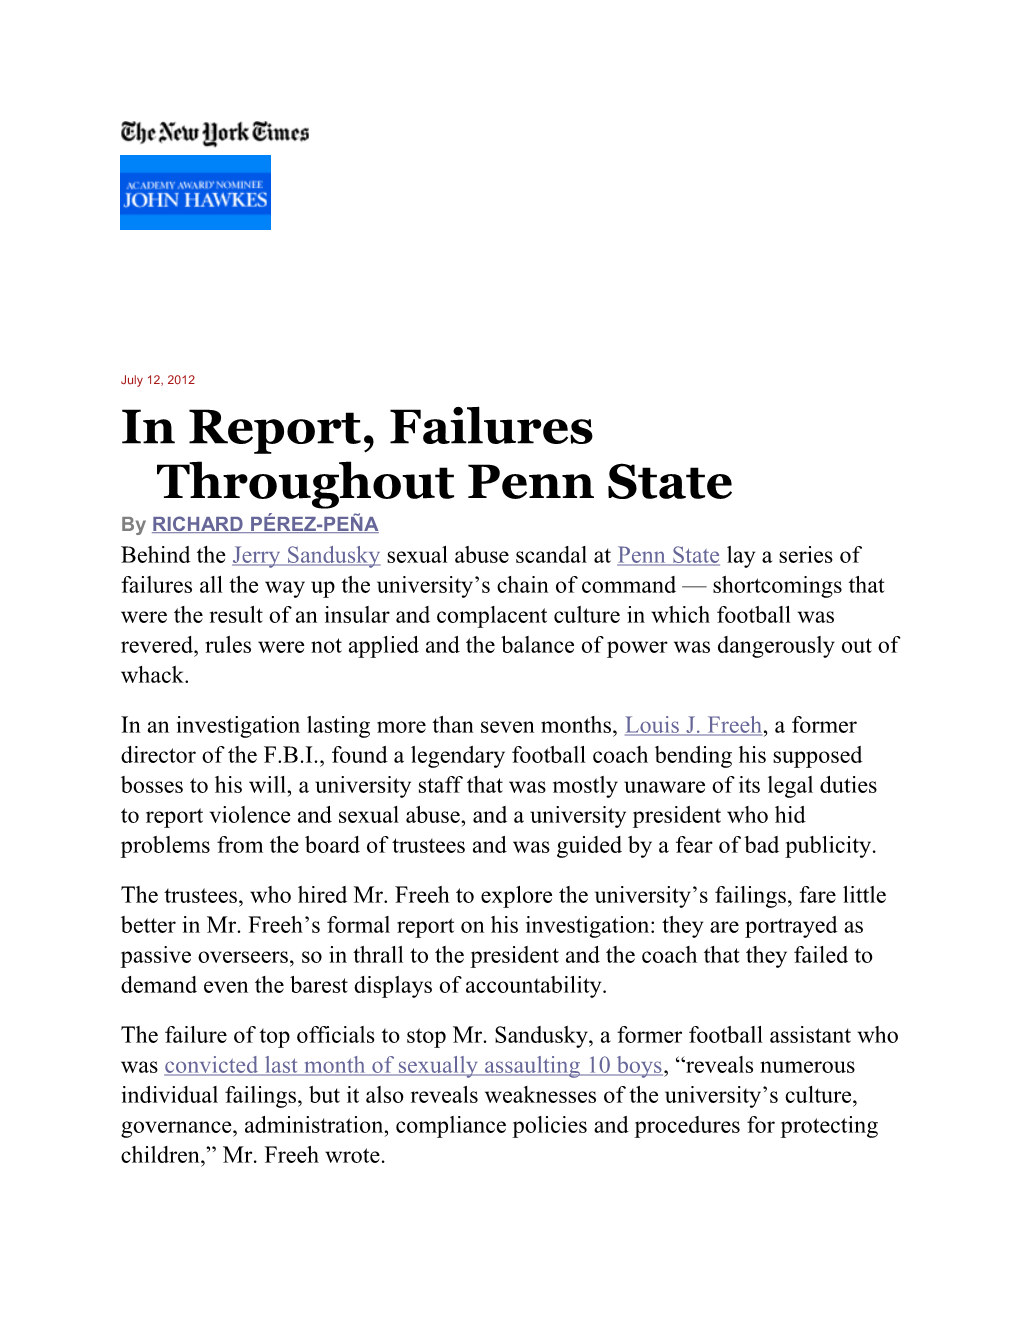 In Report, Failures Throughout Penn State